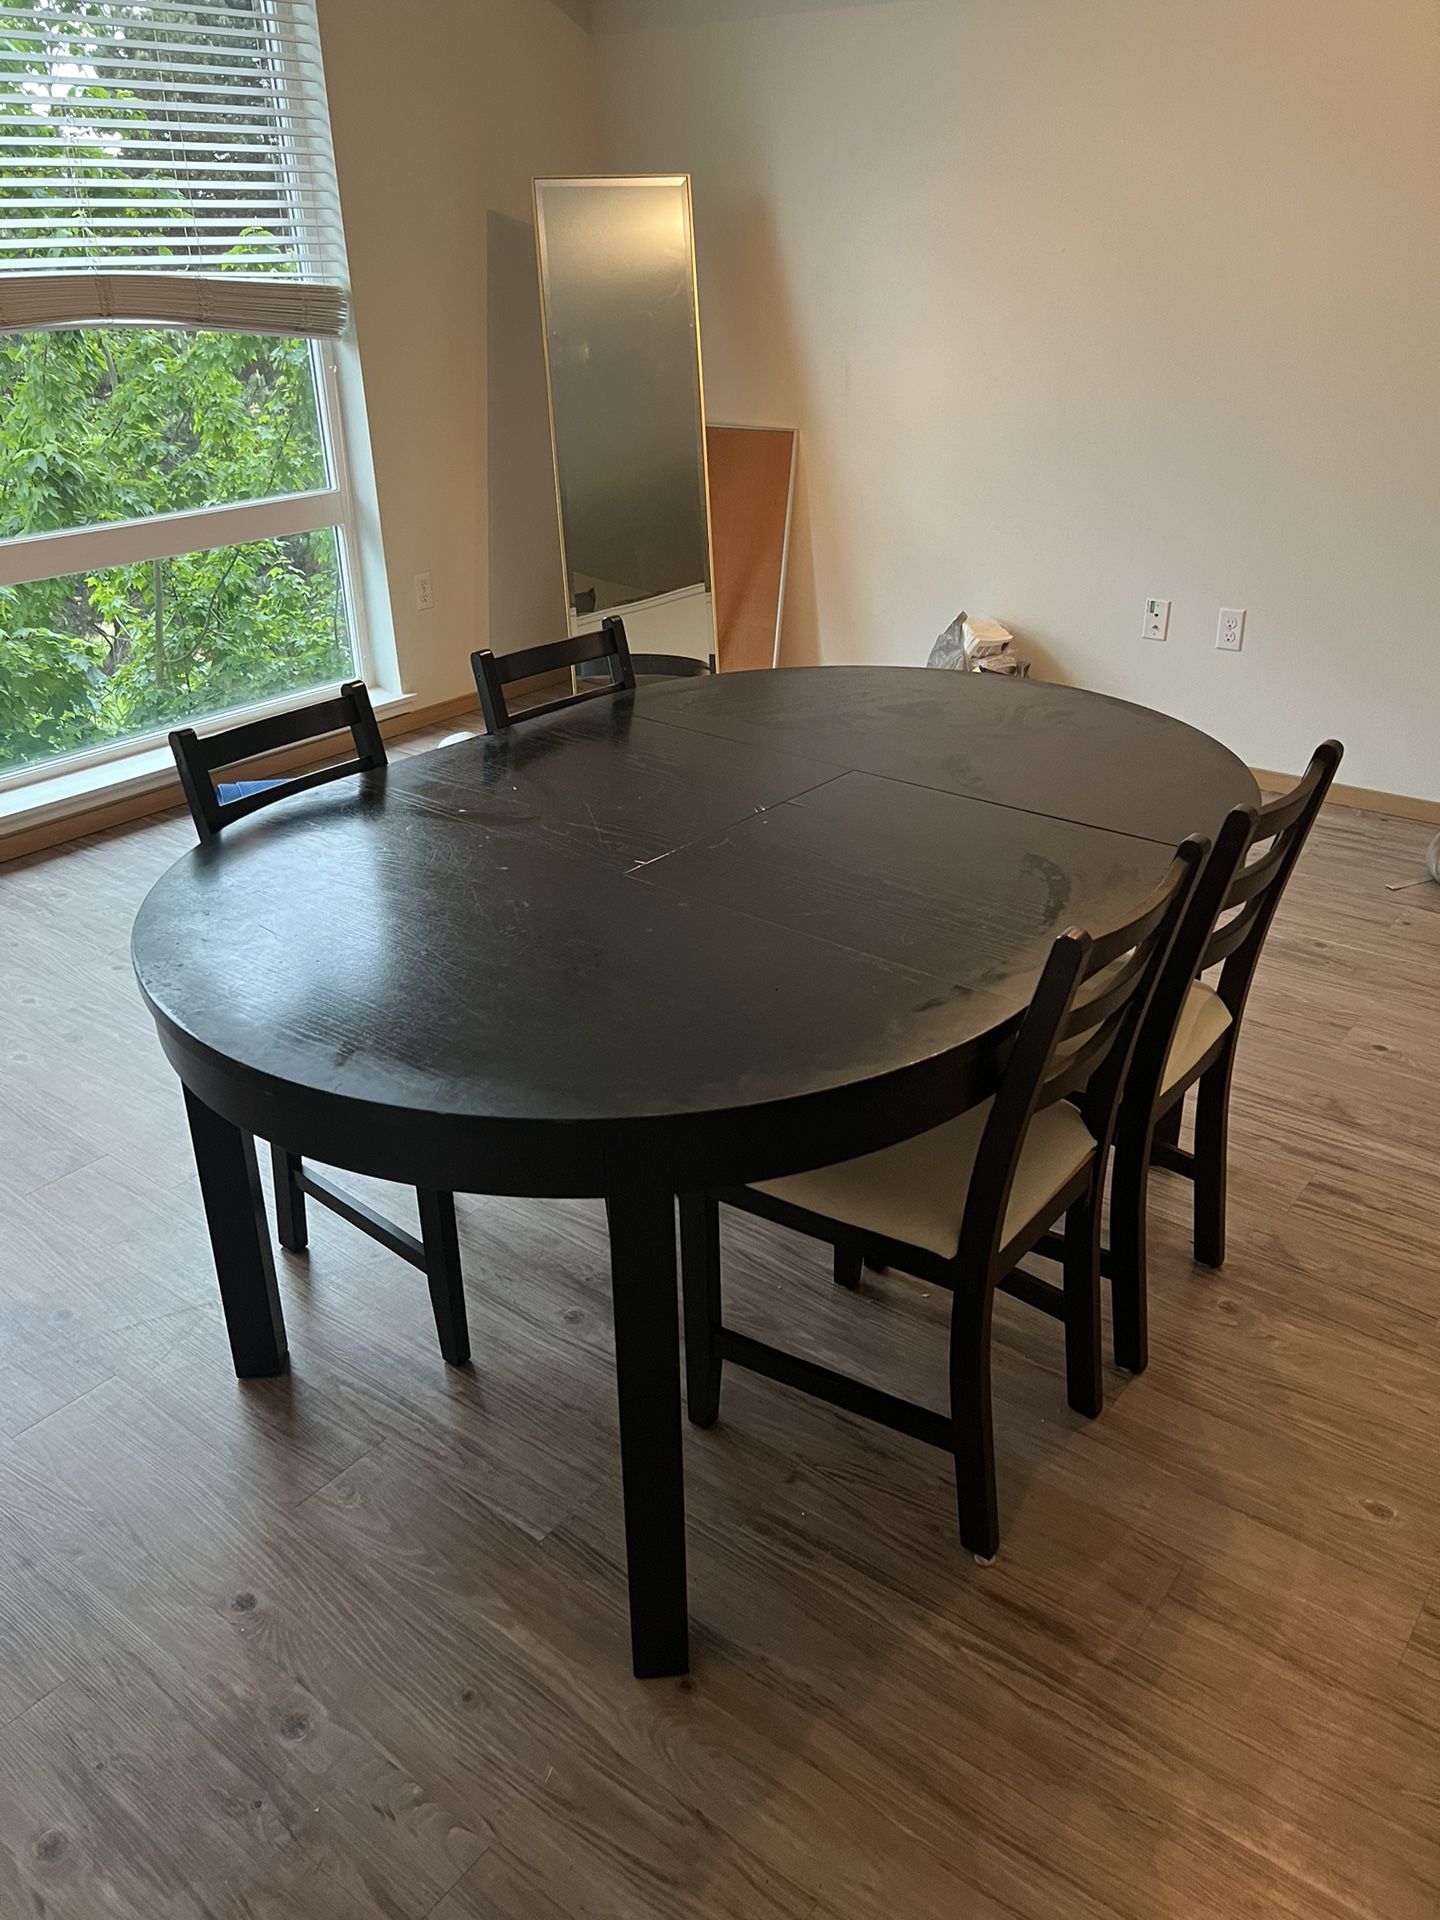 IKEA Bjursta Extendable Round Table with 4 Dining Chairs